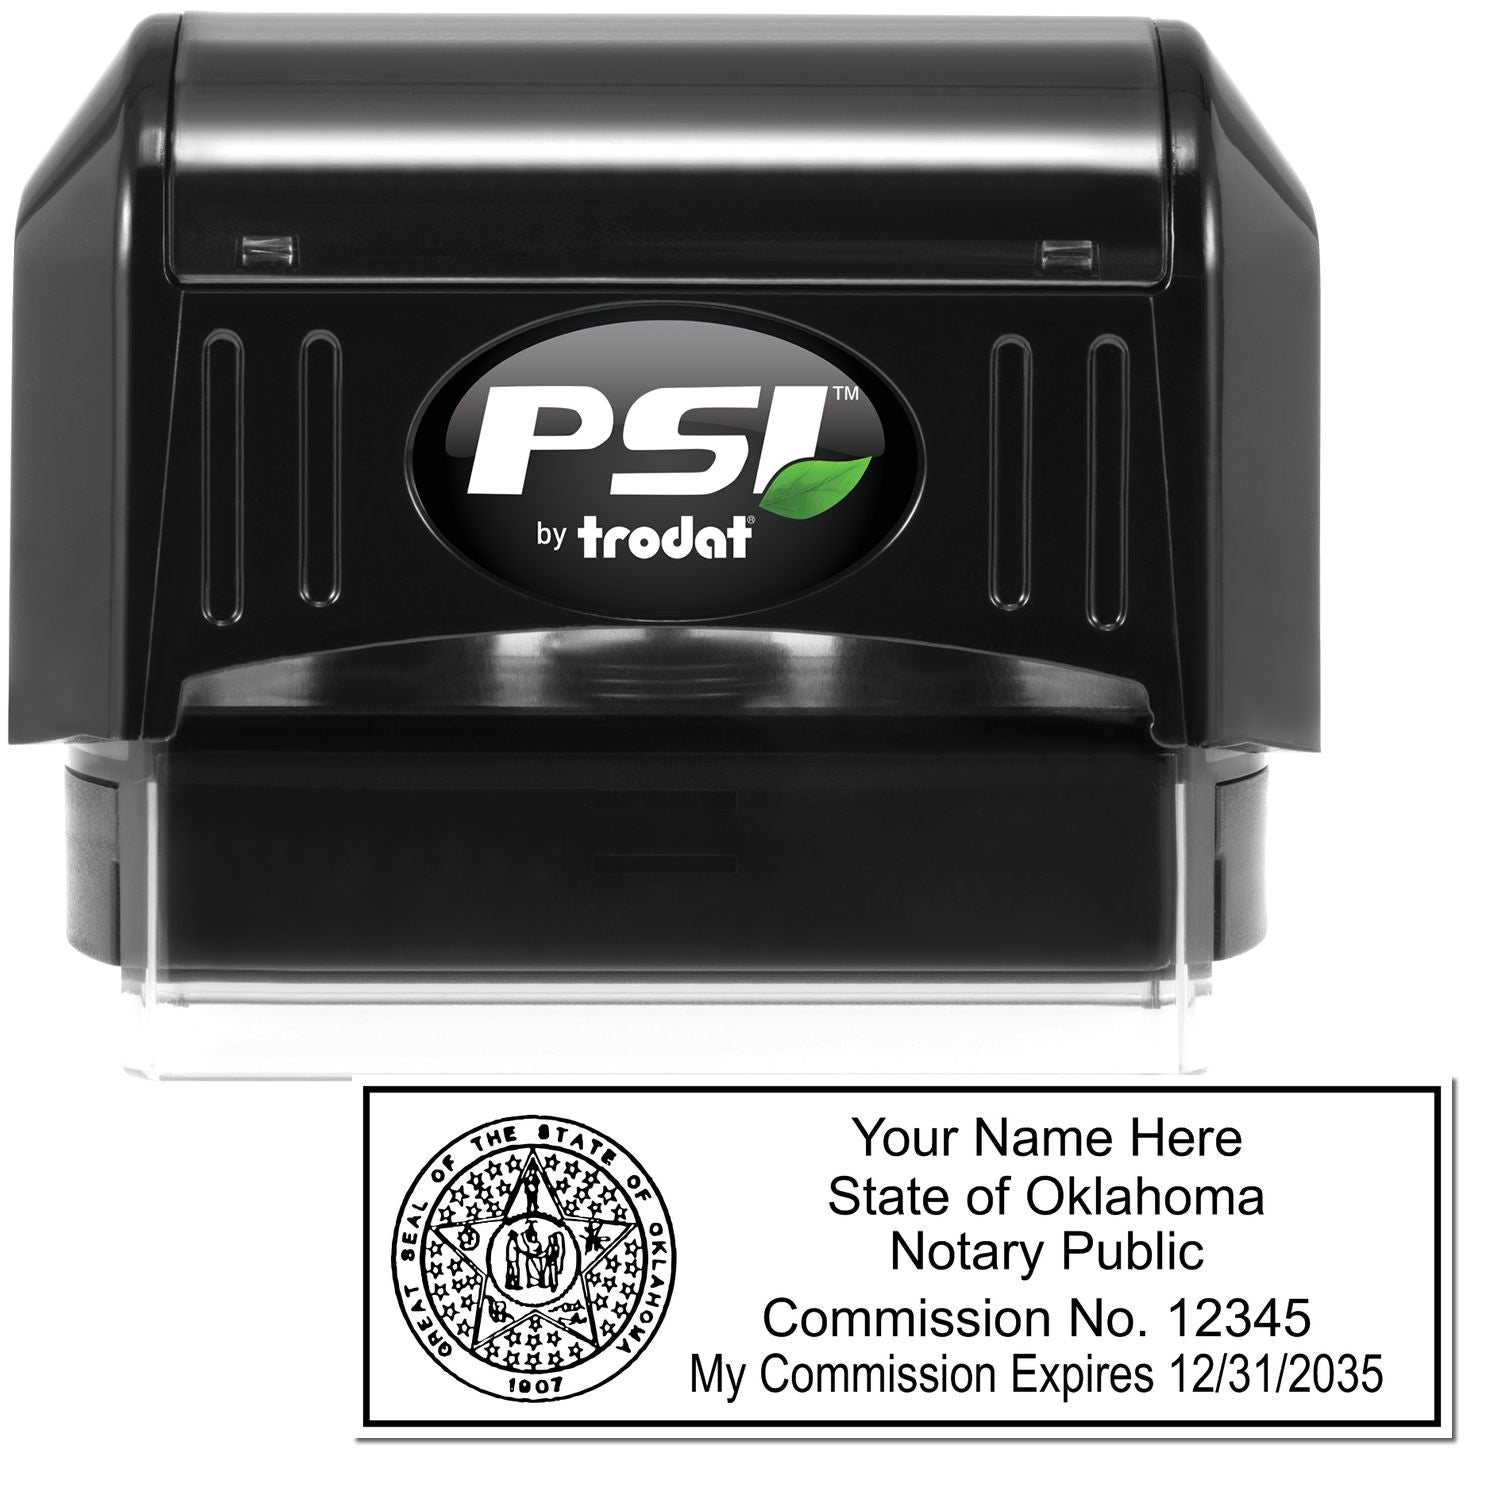 The main image for the PSI Oklahoma Notary Stamp depicting a sample of the imprint and electronic files